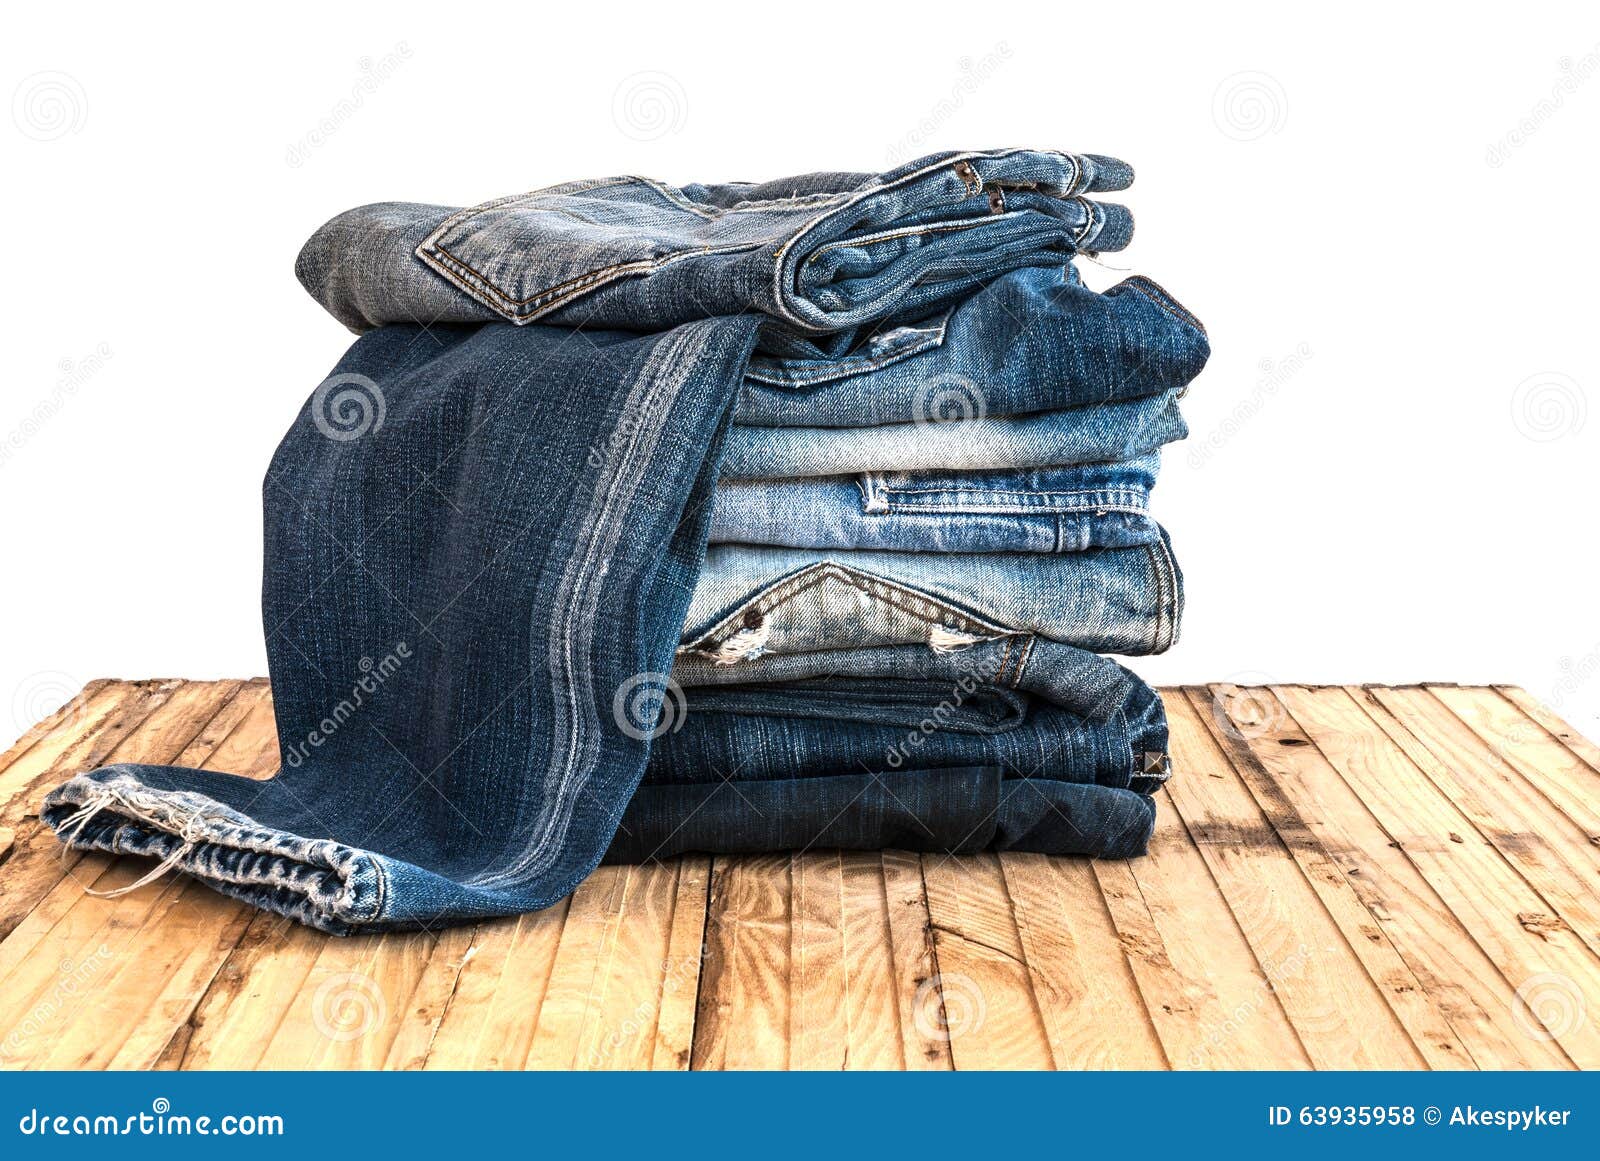 Blue Jeans Trouser Roll Up Isolated on the Wood Stock Photo - Image of ...